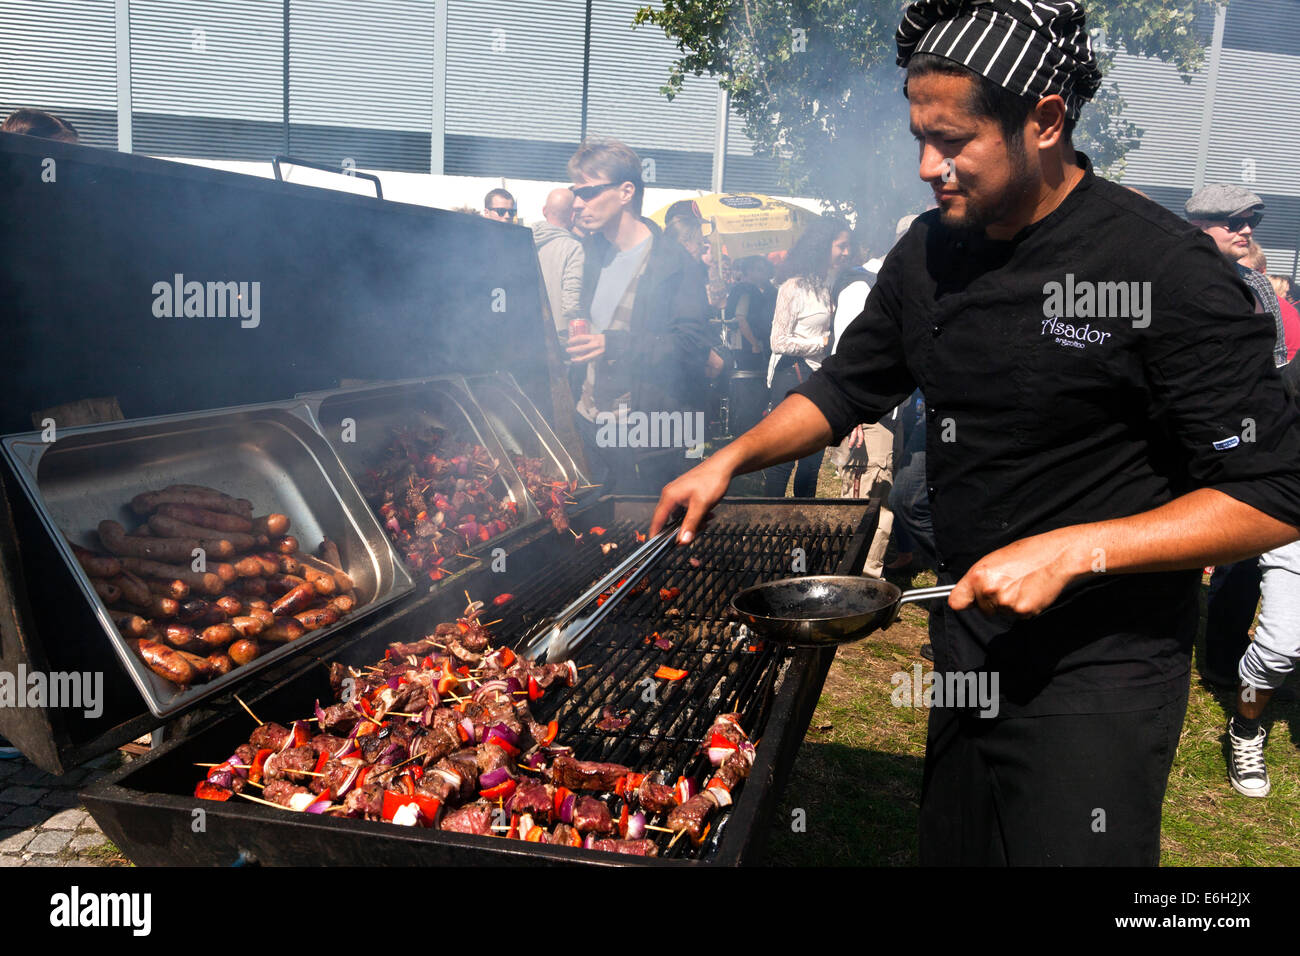 Copenhagen, Denmark. 23rd August, 23rd, 2014. Chef Raul from the Argentinian restaurant, Asador, prepares one of his favor street dishes, Pepito & Choripán, at the Copenhagen Cooking Festival, which runs until next Sunday.  Here we are at the venue at Prags Boulevard where some 100 stalls are present.  Over the coming week a total of over 150 street events take place, where many of the best restaurants offer their gastronomy to a bargain price. Among others 10 Scandinavian Michelin and other top gourmet restaurants presents their version of ”Nordic Taste” at the Gefion Fountain next Sunday © O Stock Photo